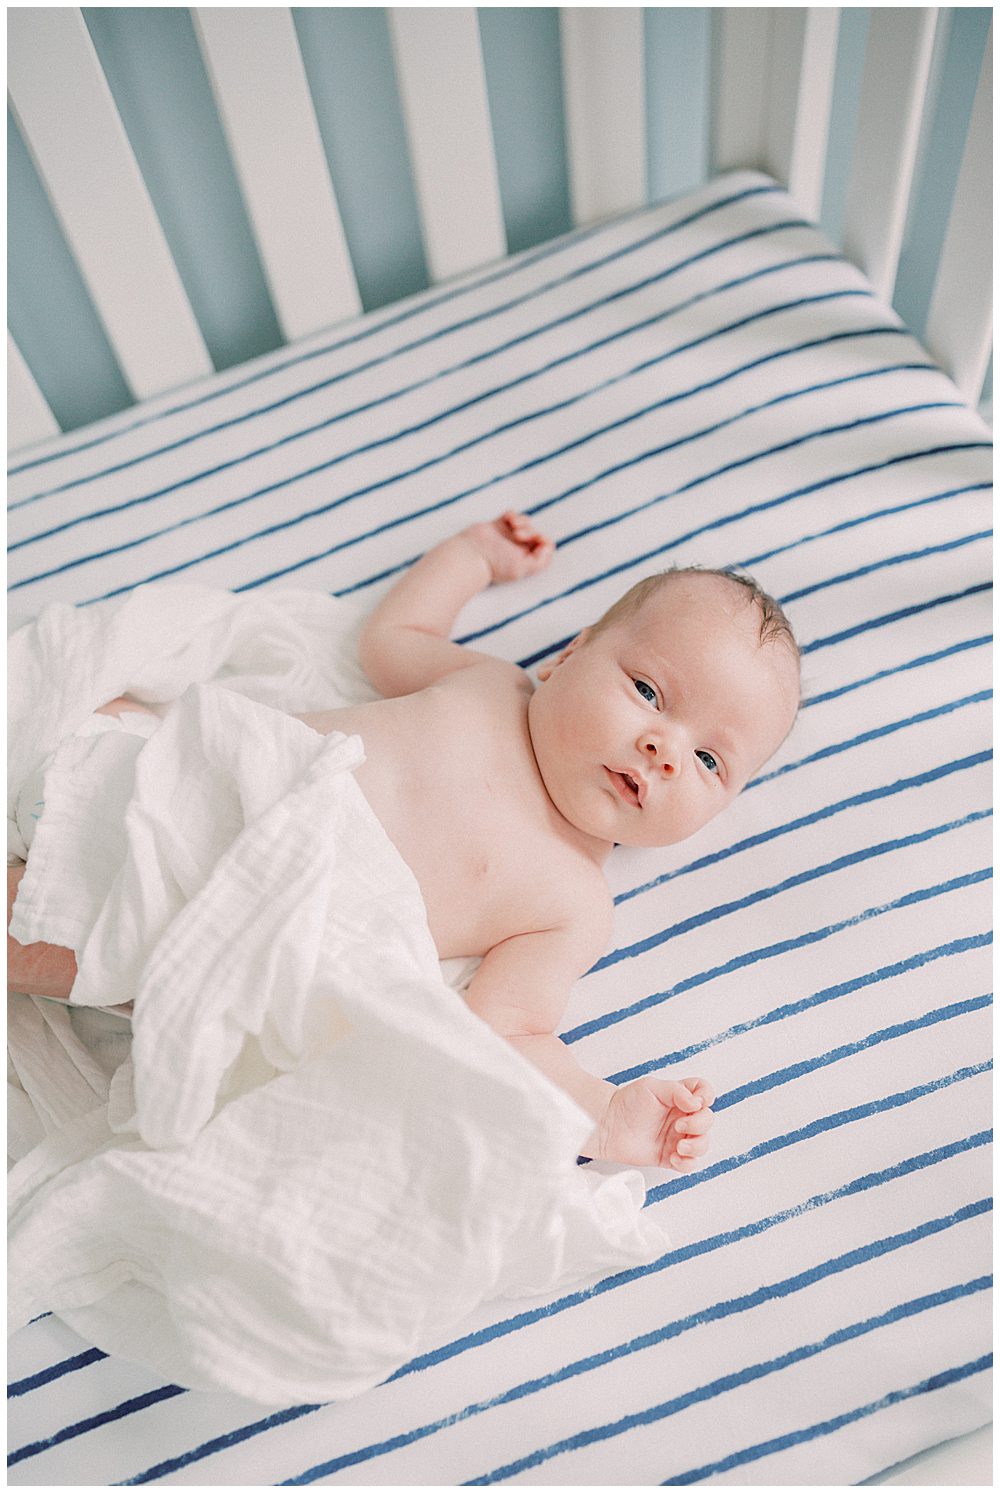 Baby boy loosely wrapped in a white swaddle lays in his navy and white striped crib